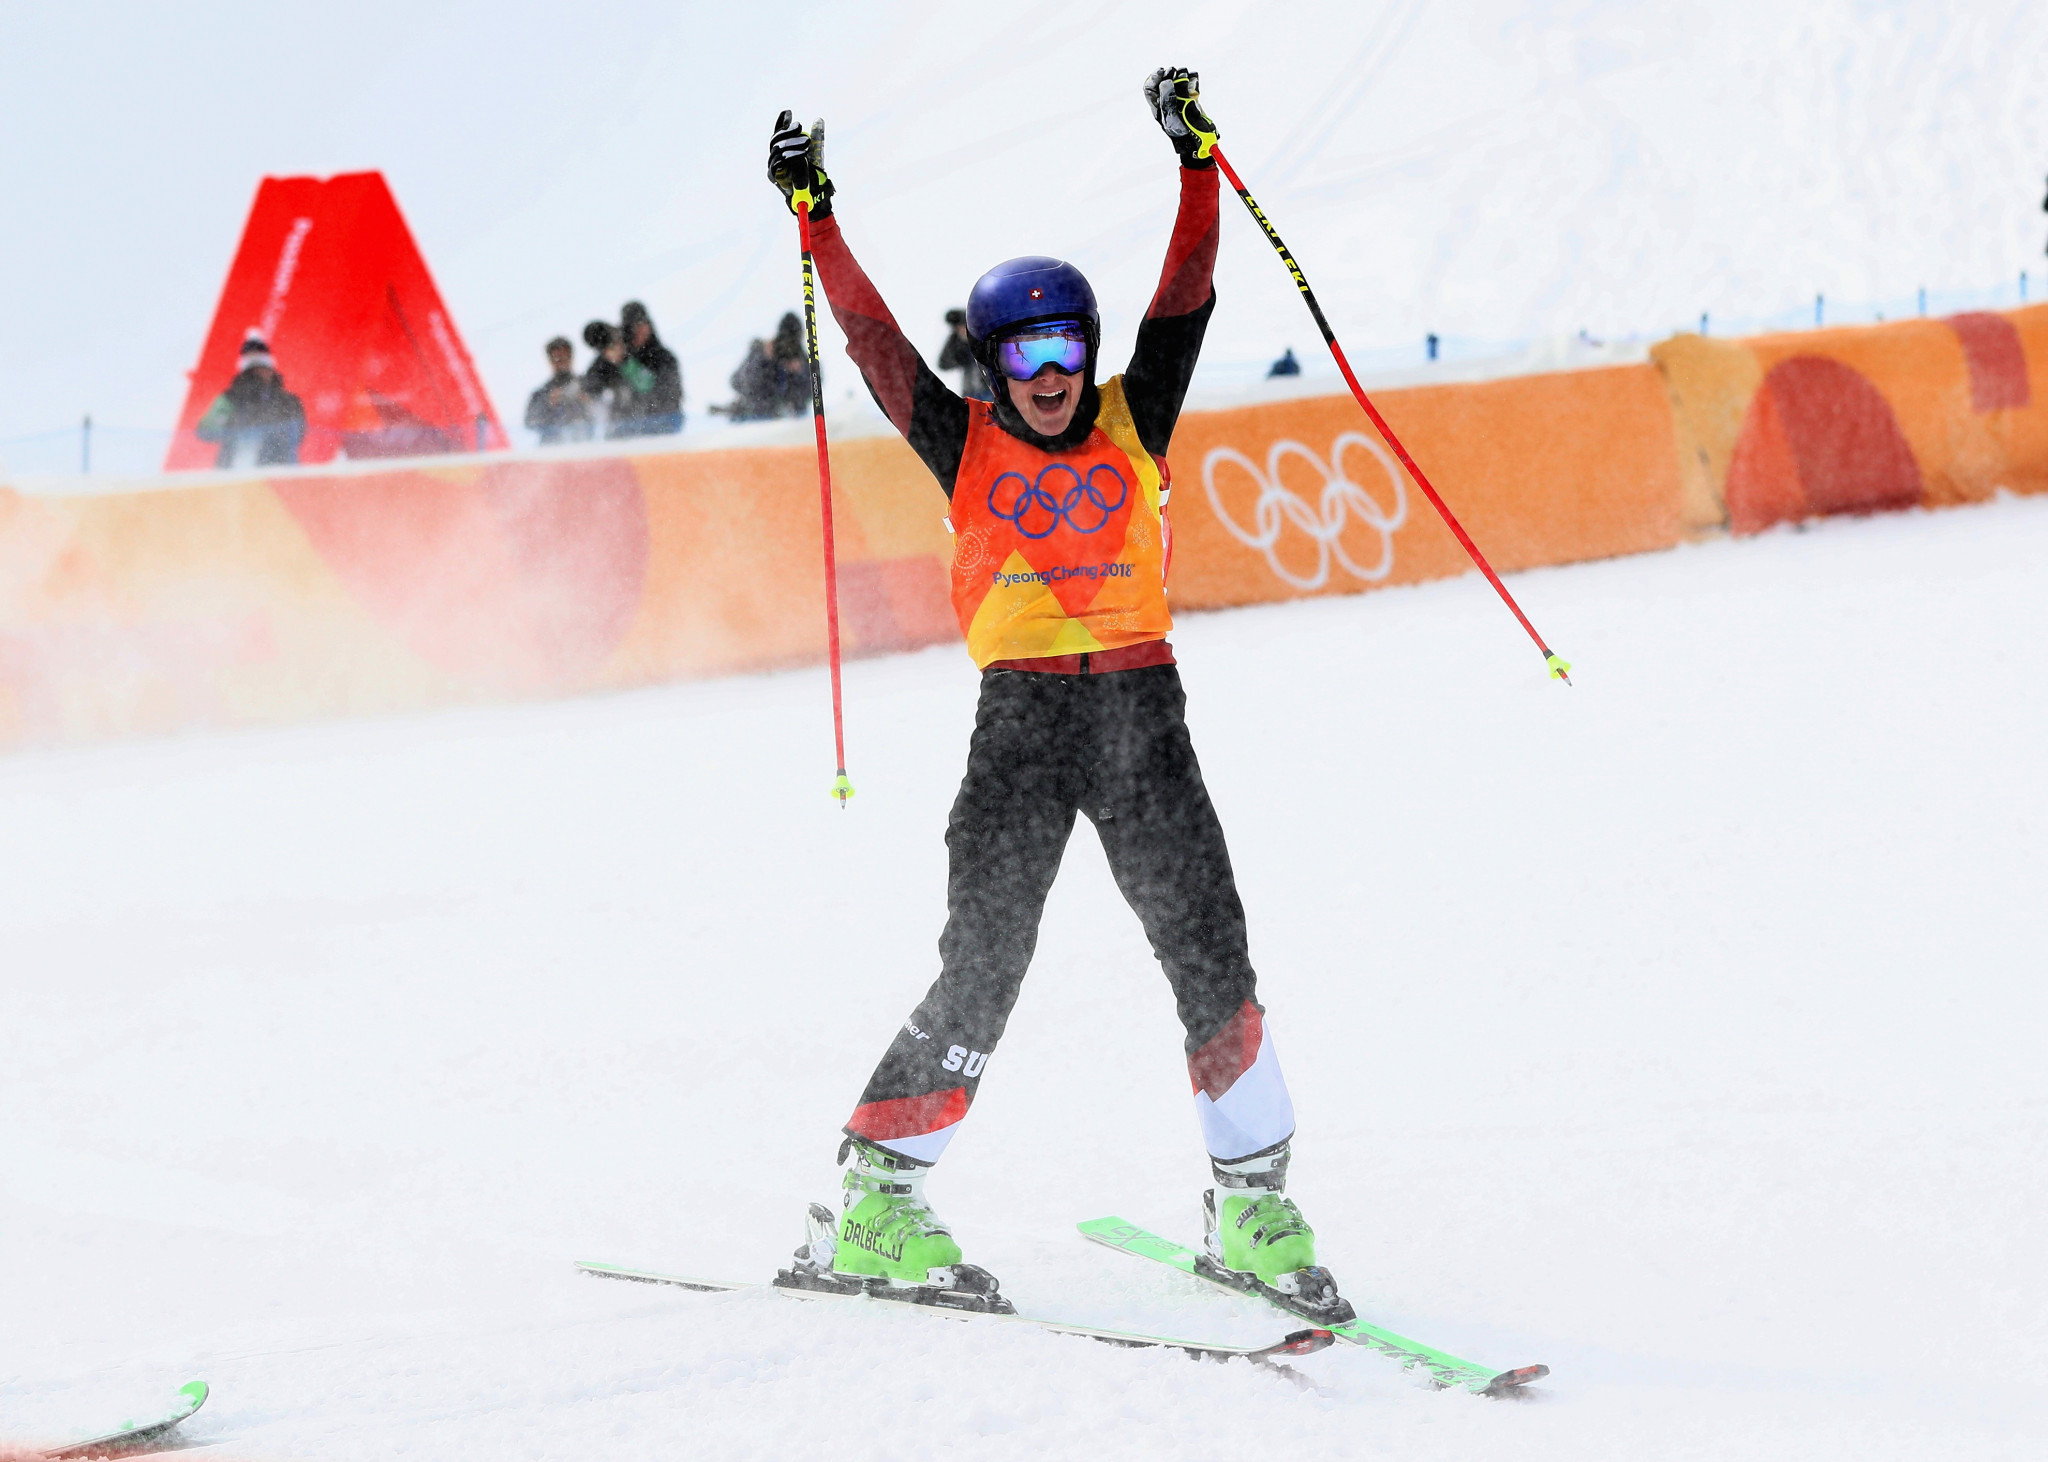 Olympic bronze medallist Smith leads women's Ski Cross World Cup qualifiers in Russia